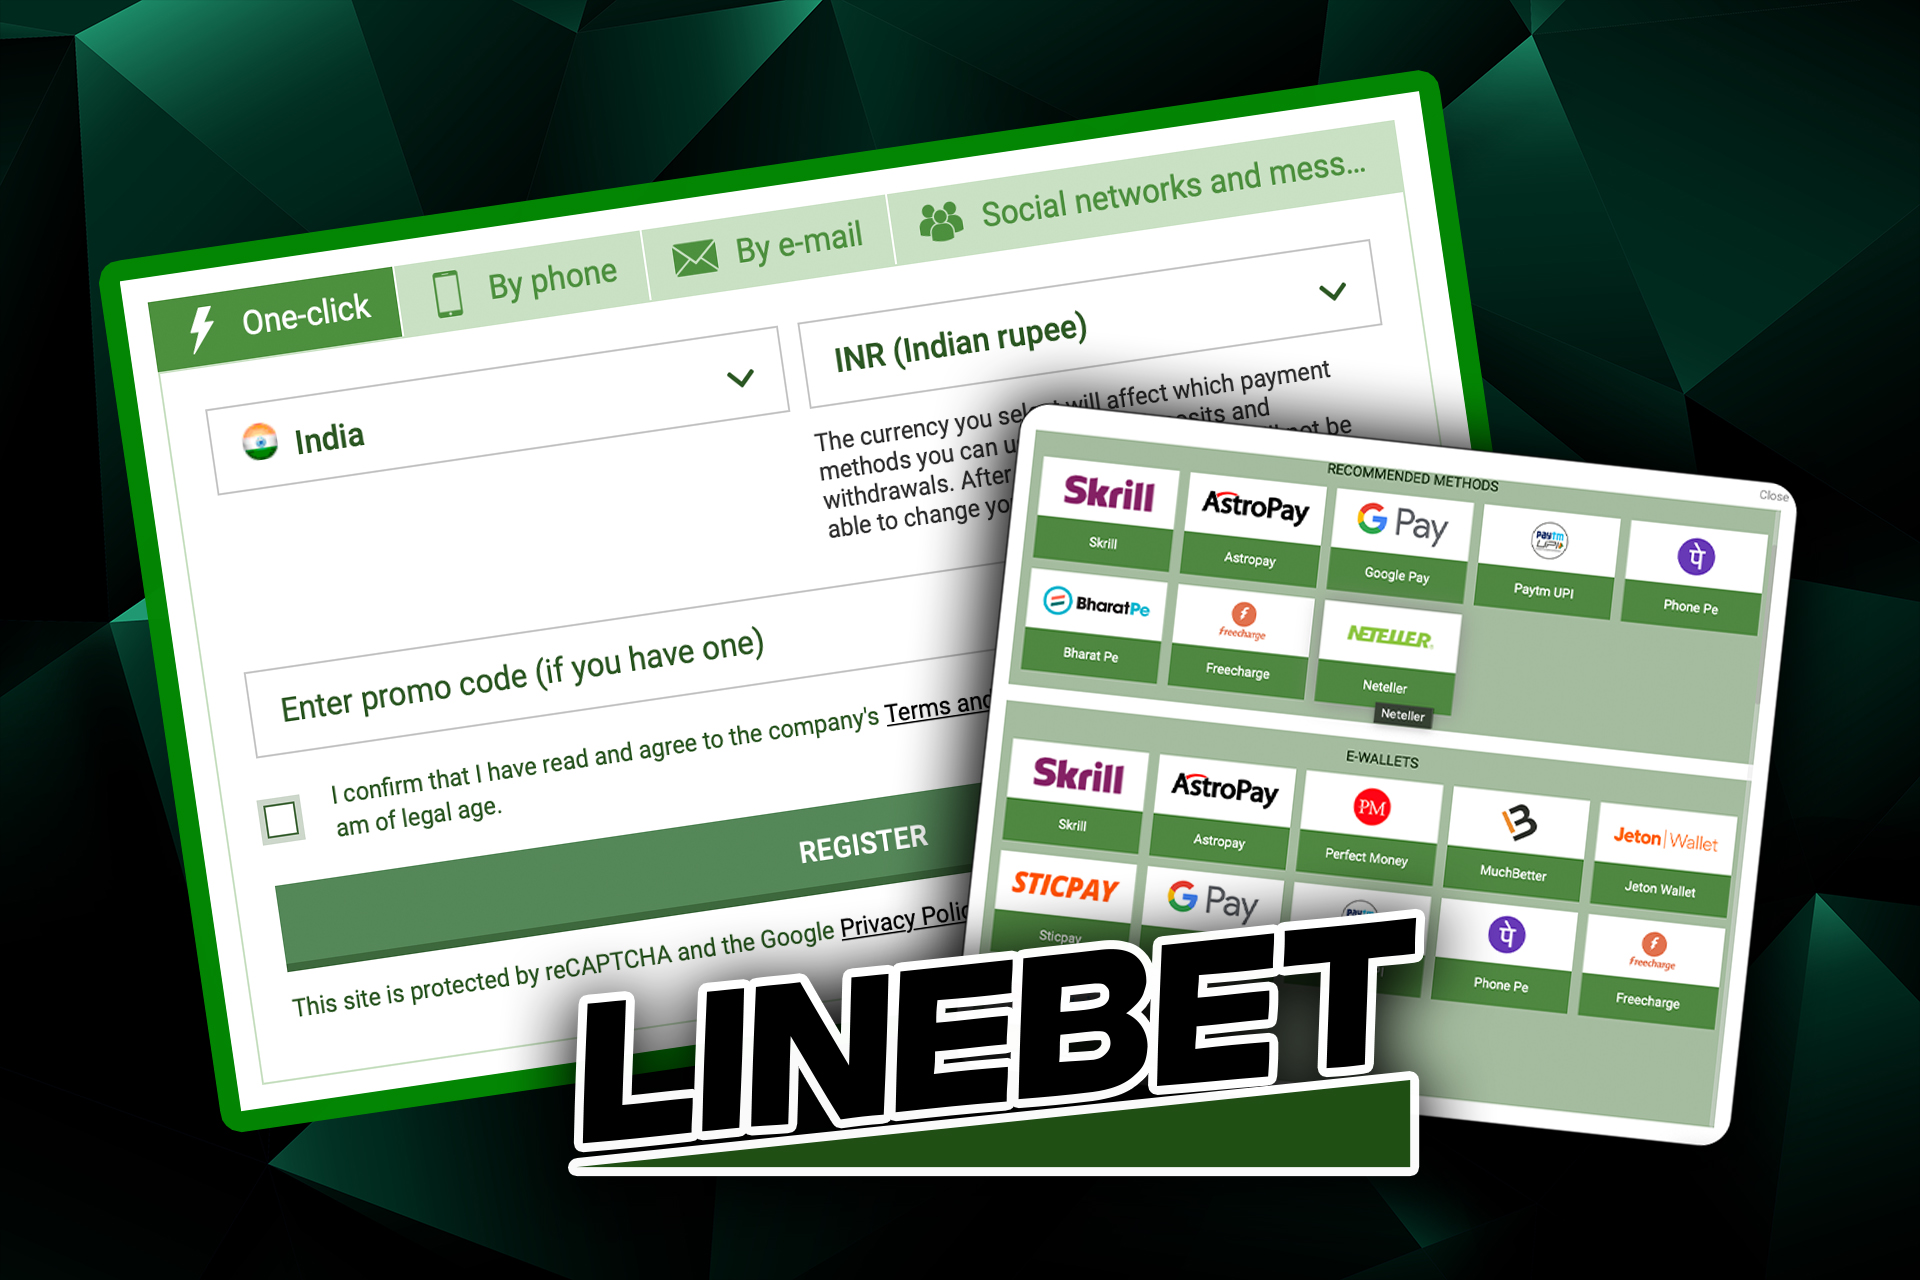 Sign up for Linebet, go to the cashier desk, choose a payment method and deposit Linebet.